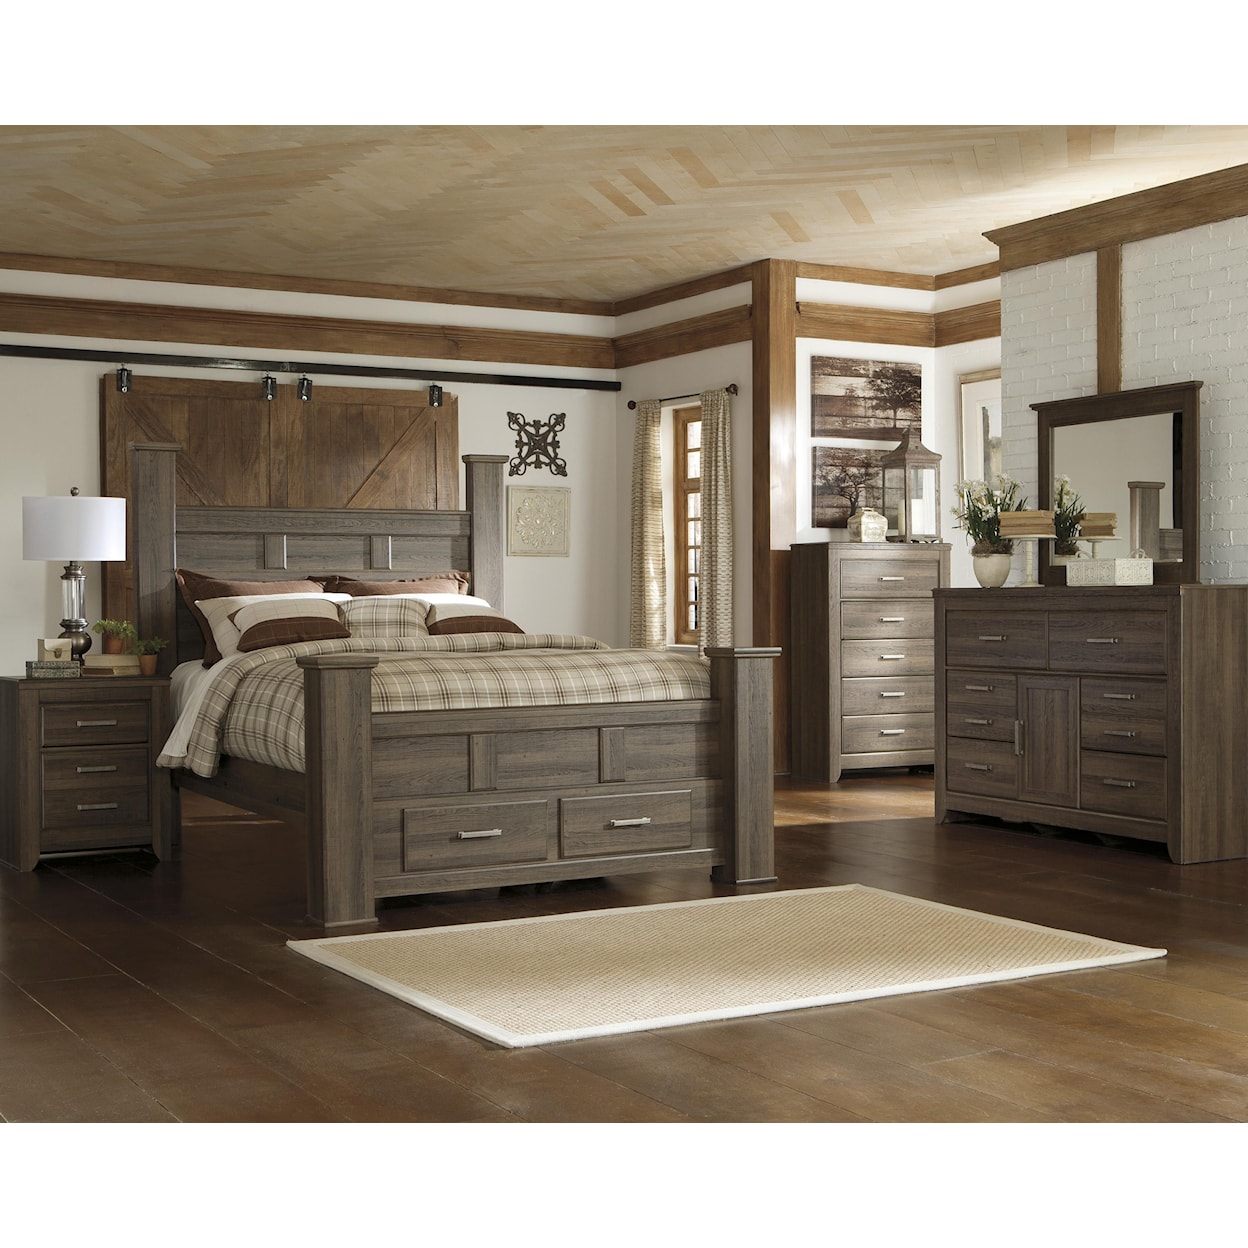 Signature Design by Ashley Juararo Queen Poster Storage Bed